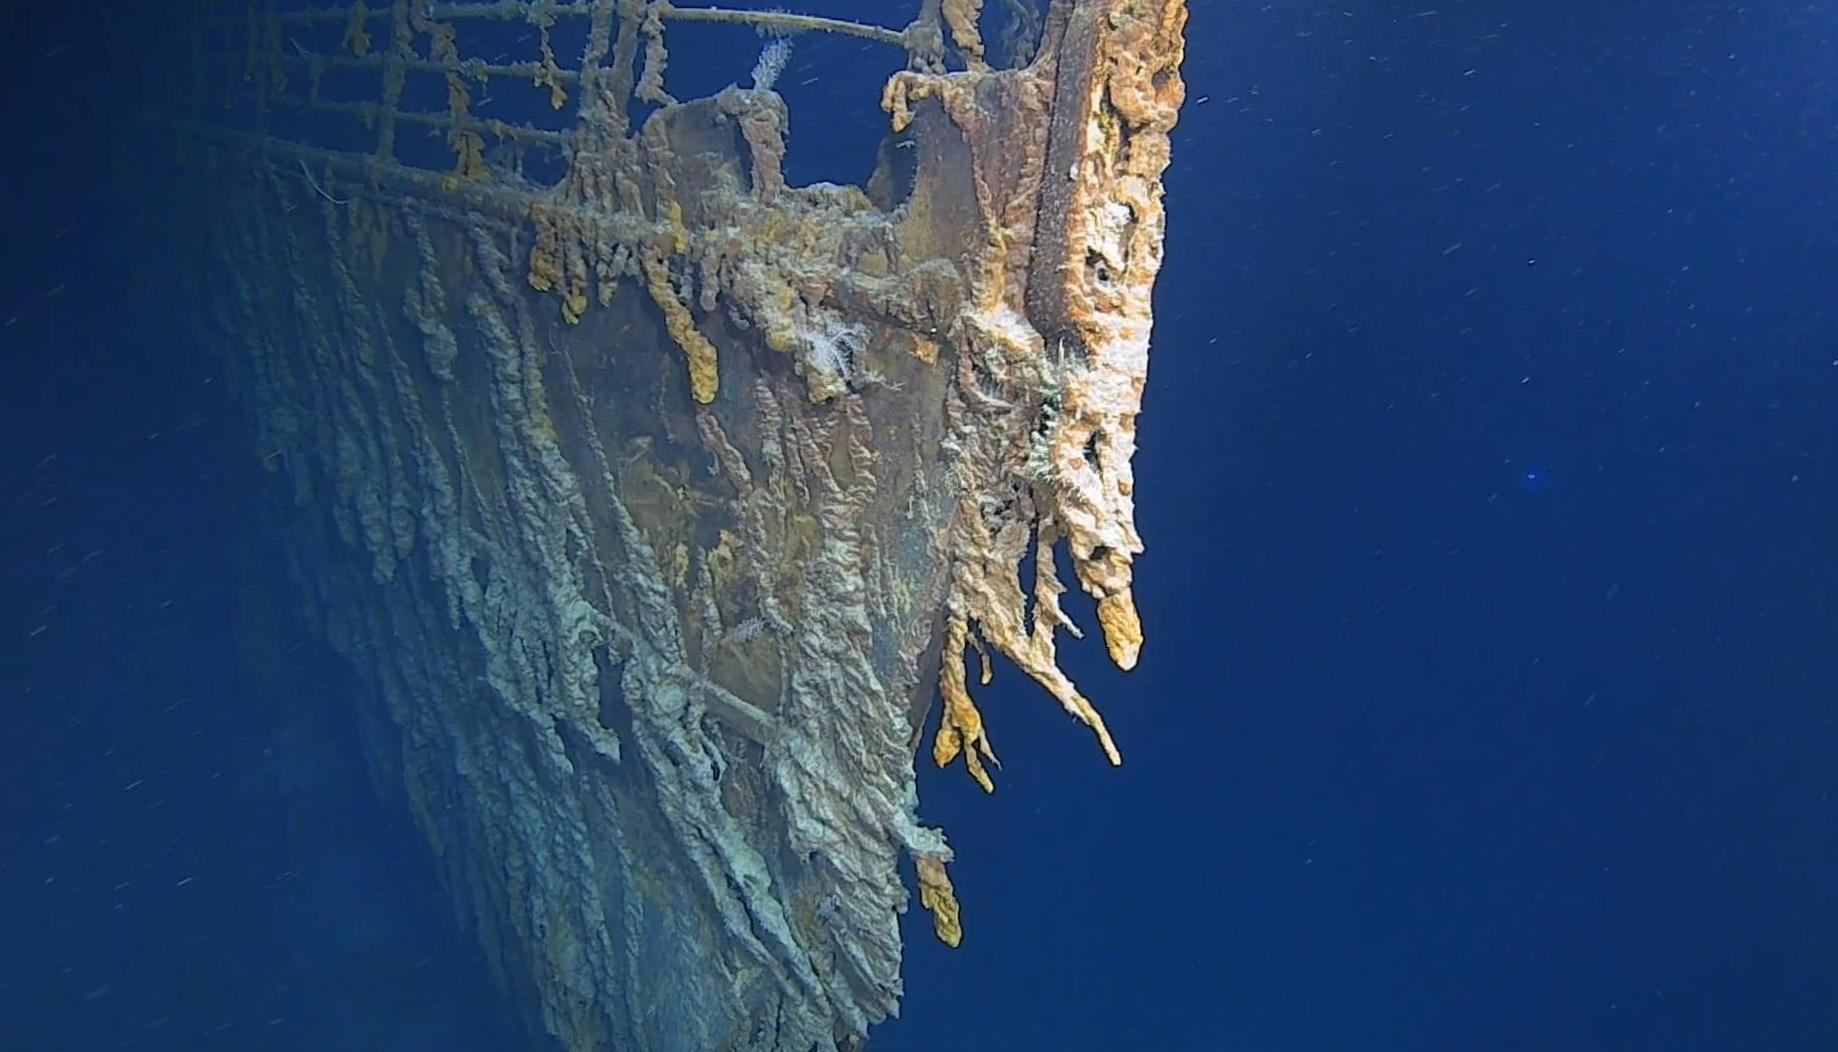 Diving to See the Titanic - Unforgettable Adventure of Exploring History 